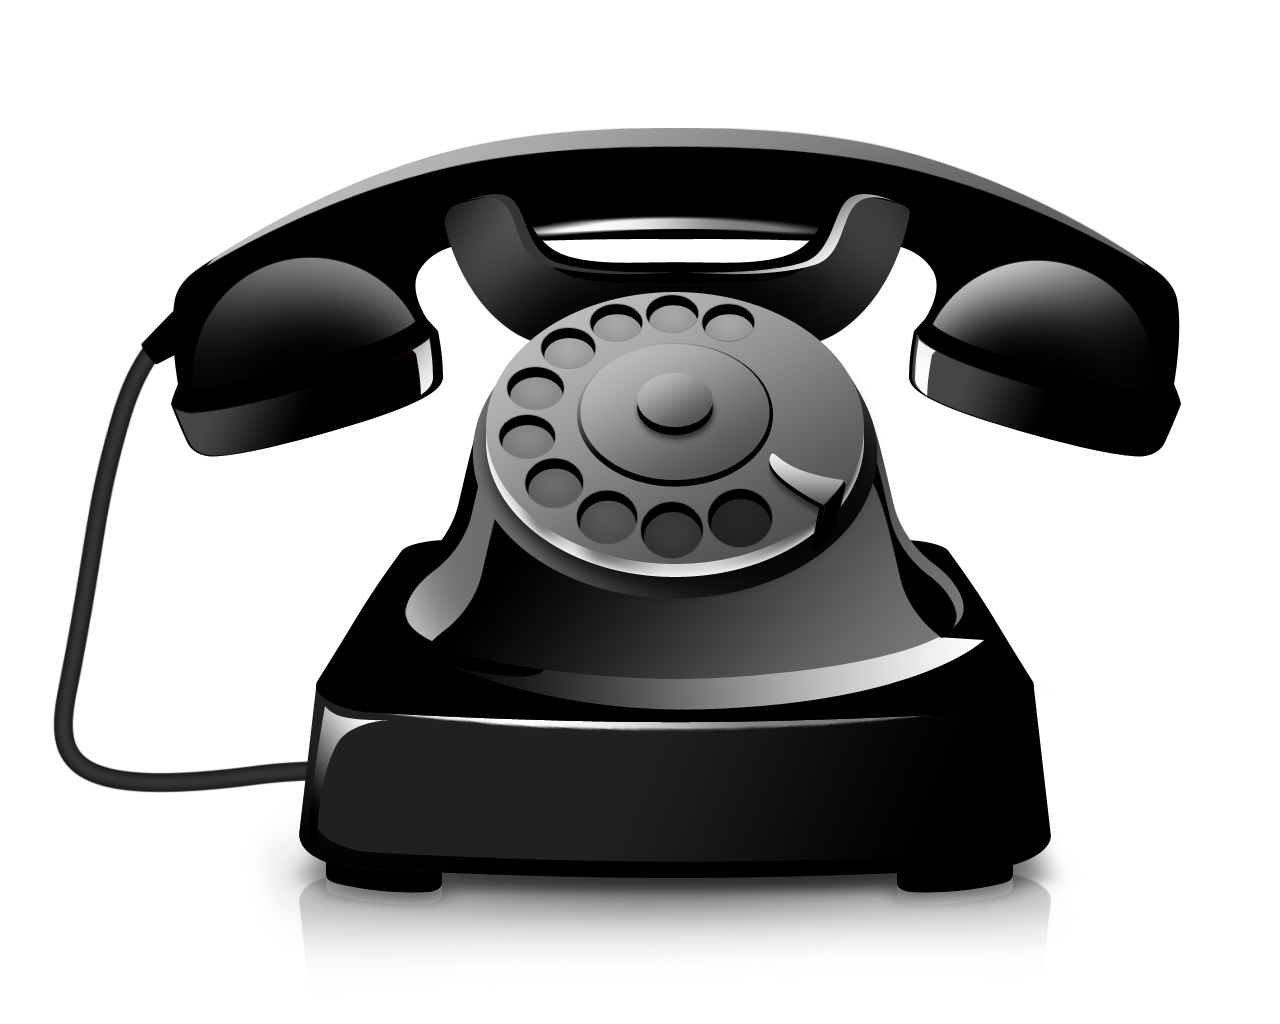 Telephone Image PNG HD - 125071